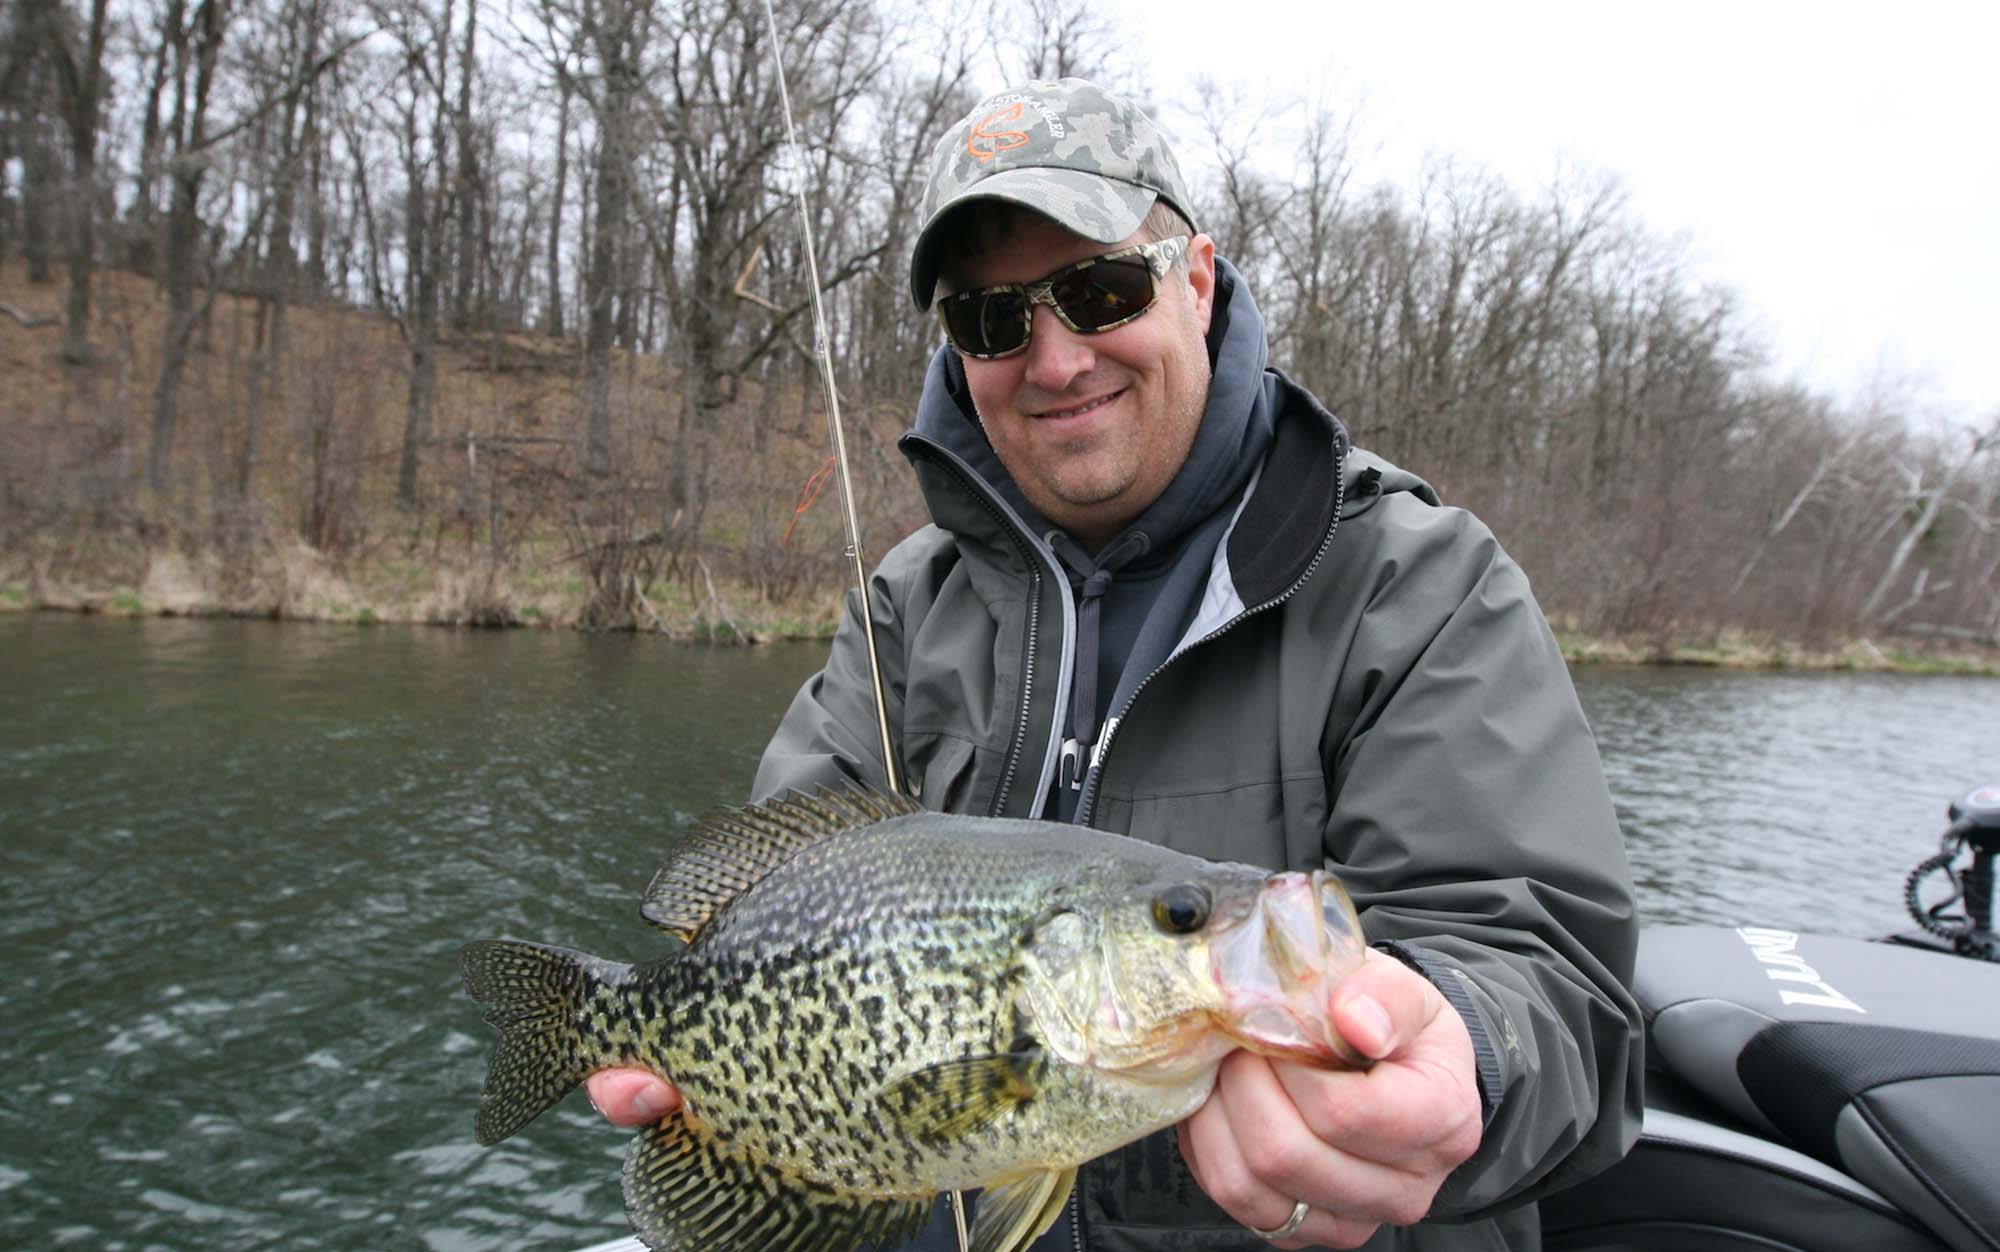 Man holding crappie in a fishing boat.